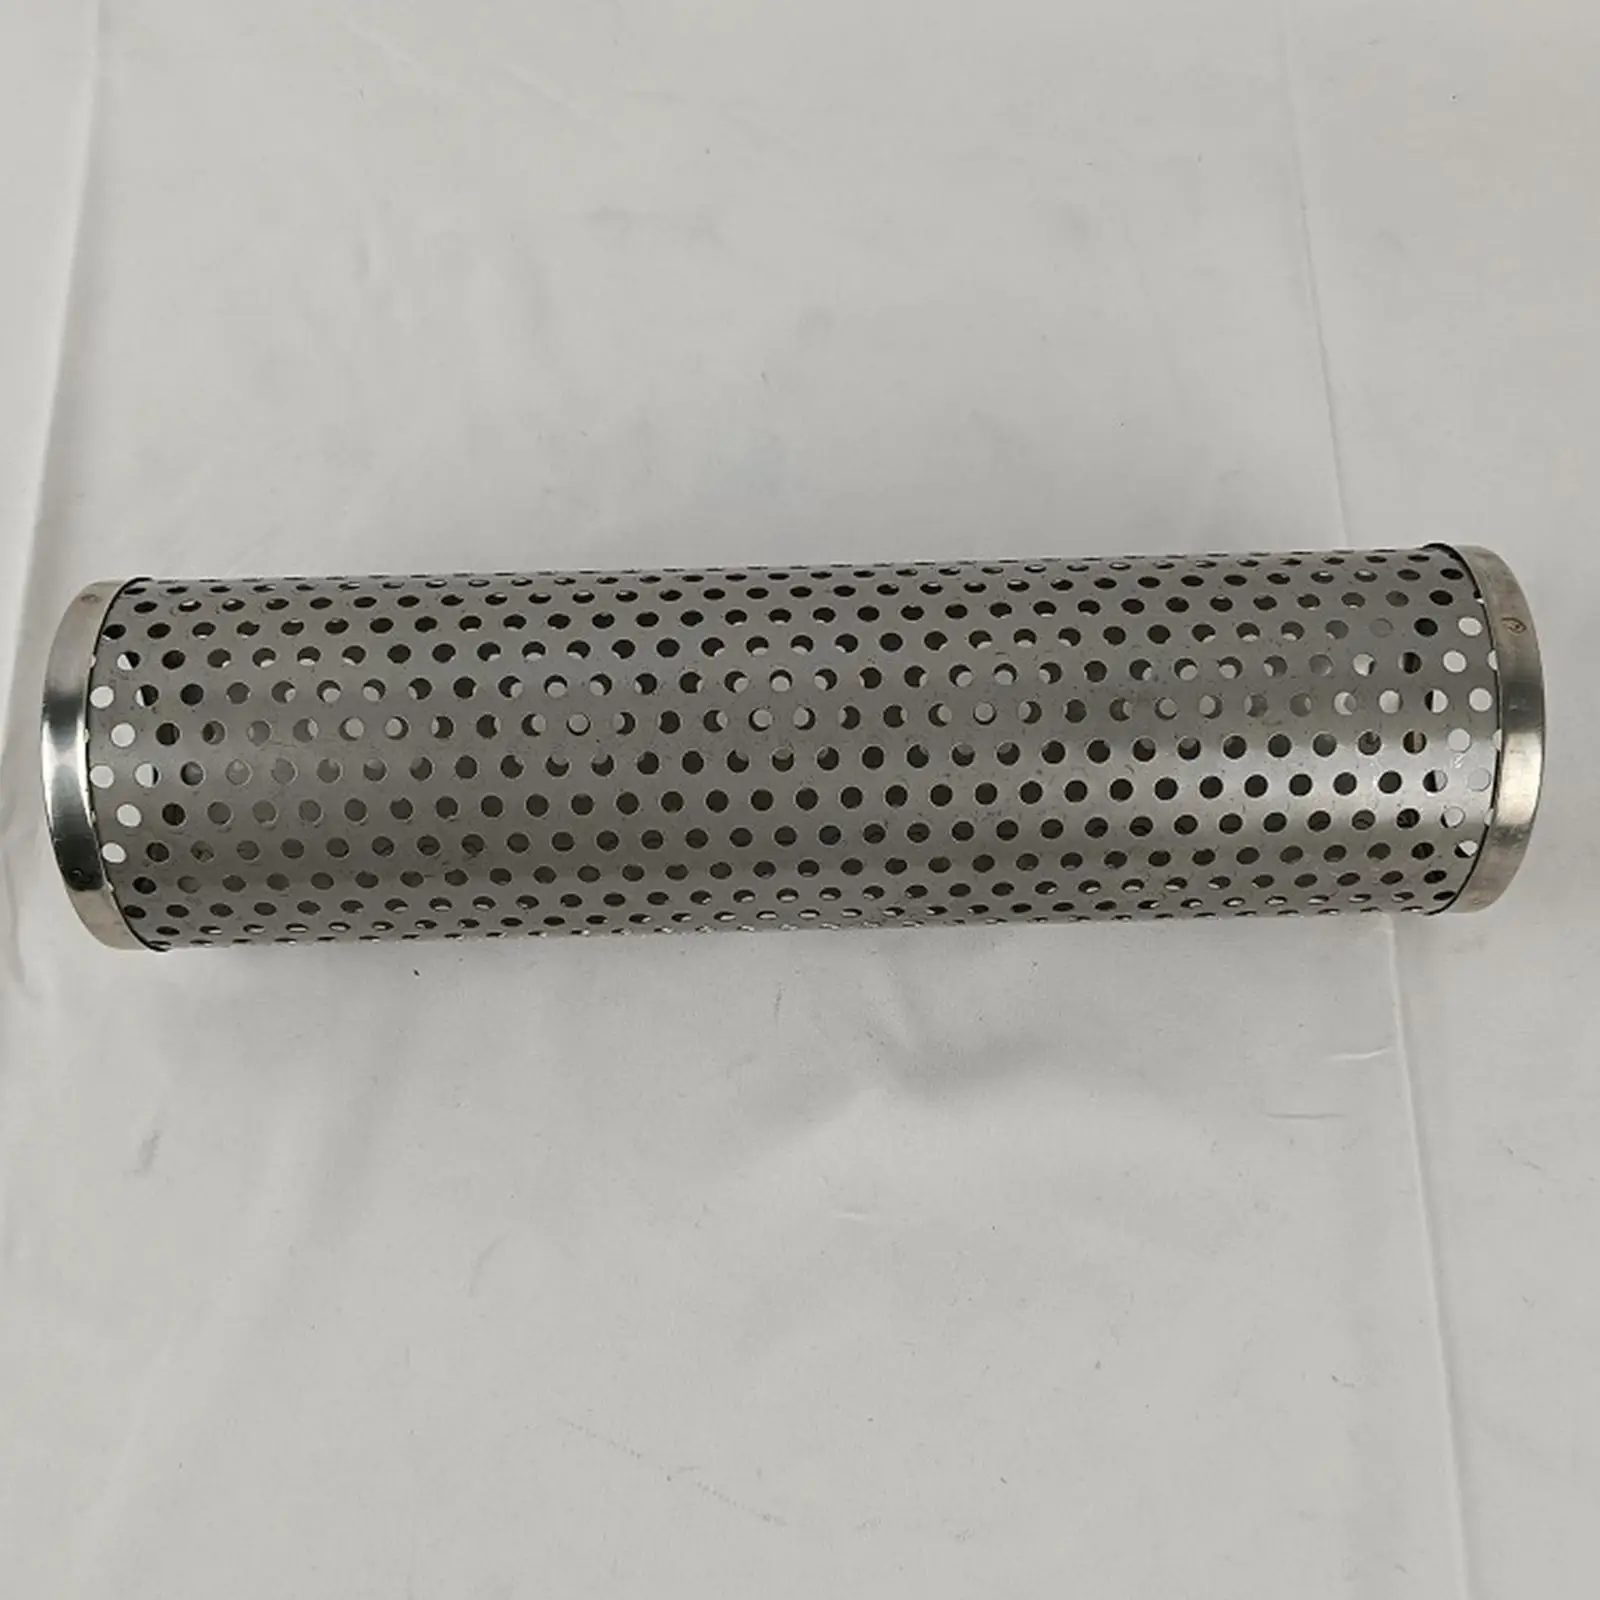 Stove Chimney Pipe Cover Temperature Resistant Anti Scald Mesh Cover